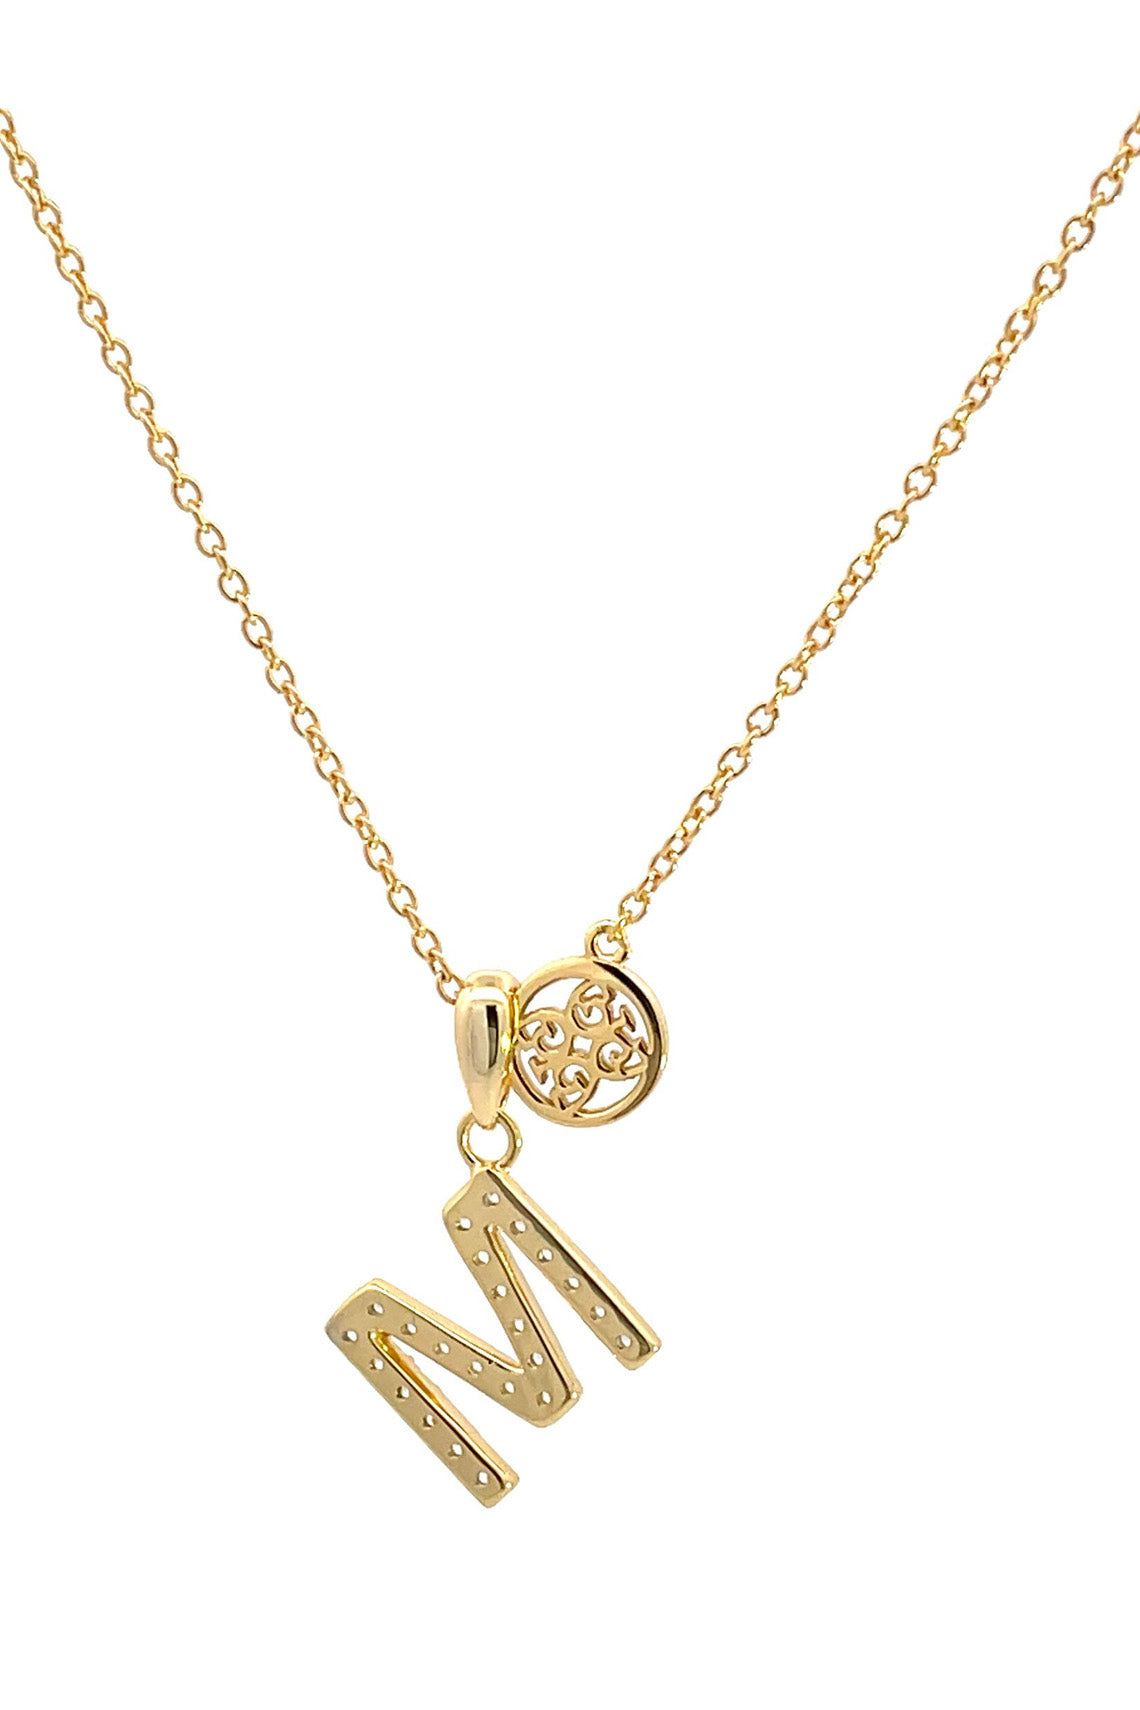 LUXURY LETTERS M INITIAL PENDANT GOLD